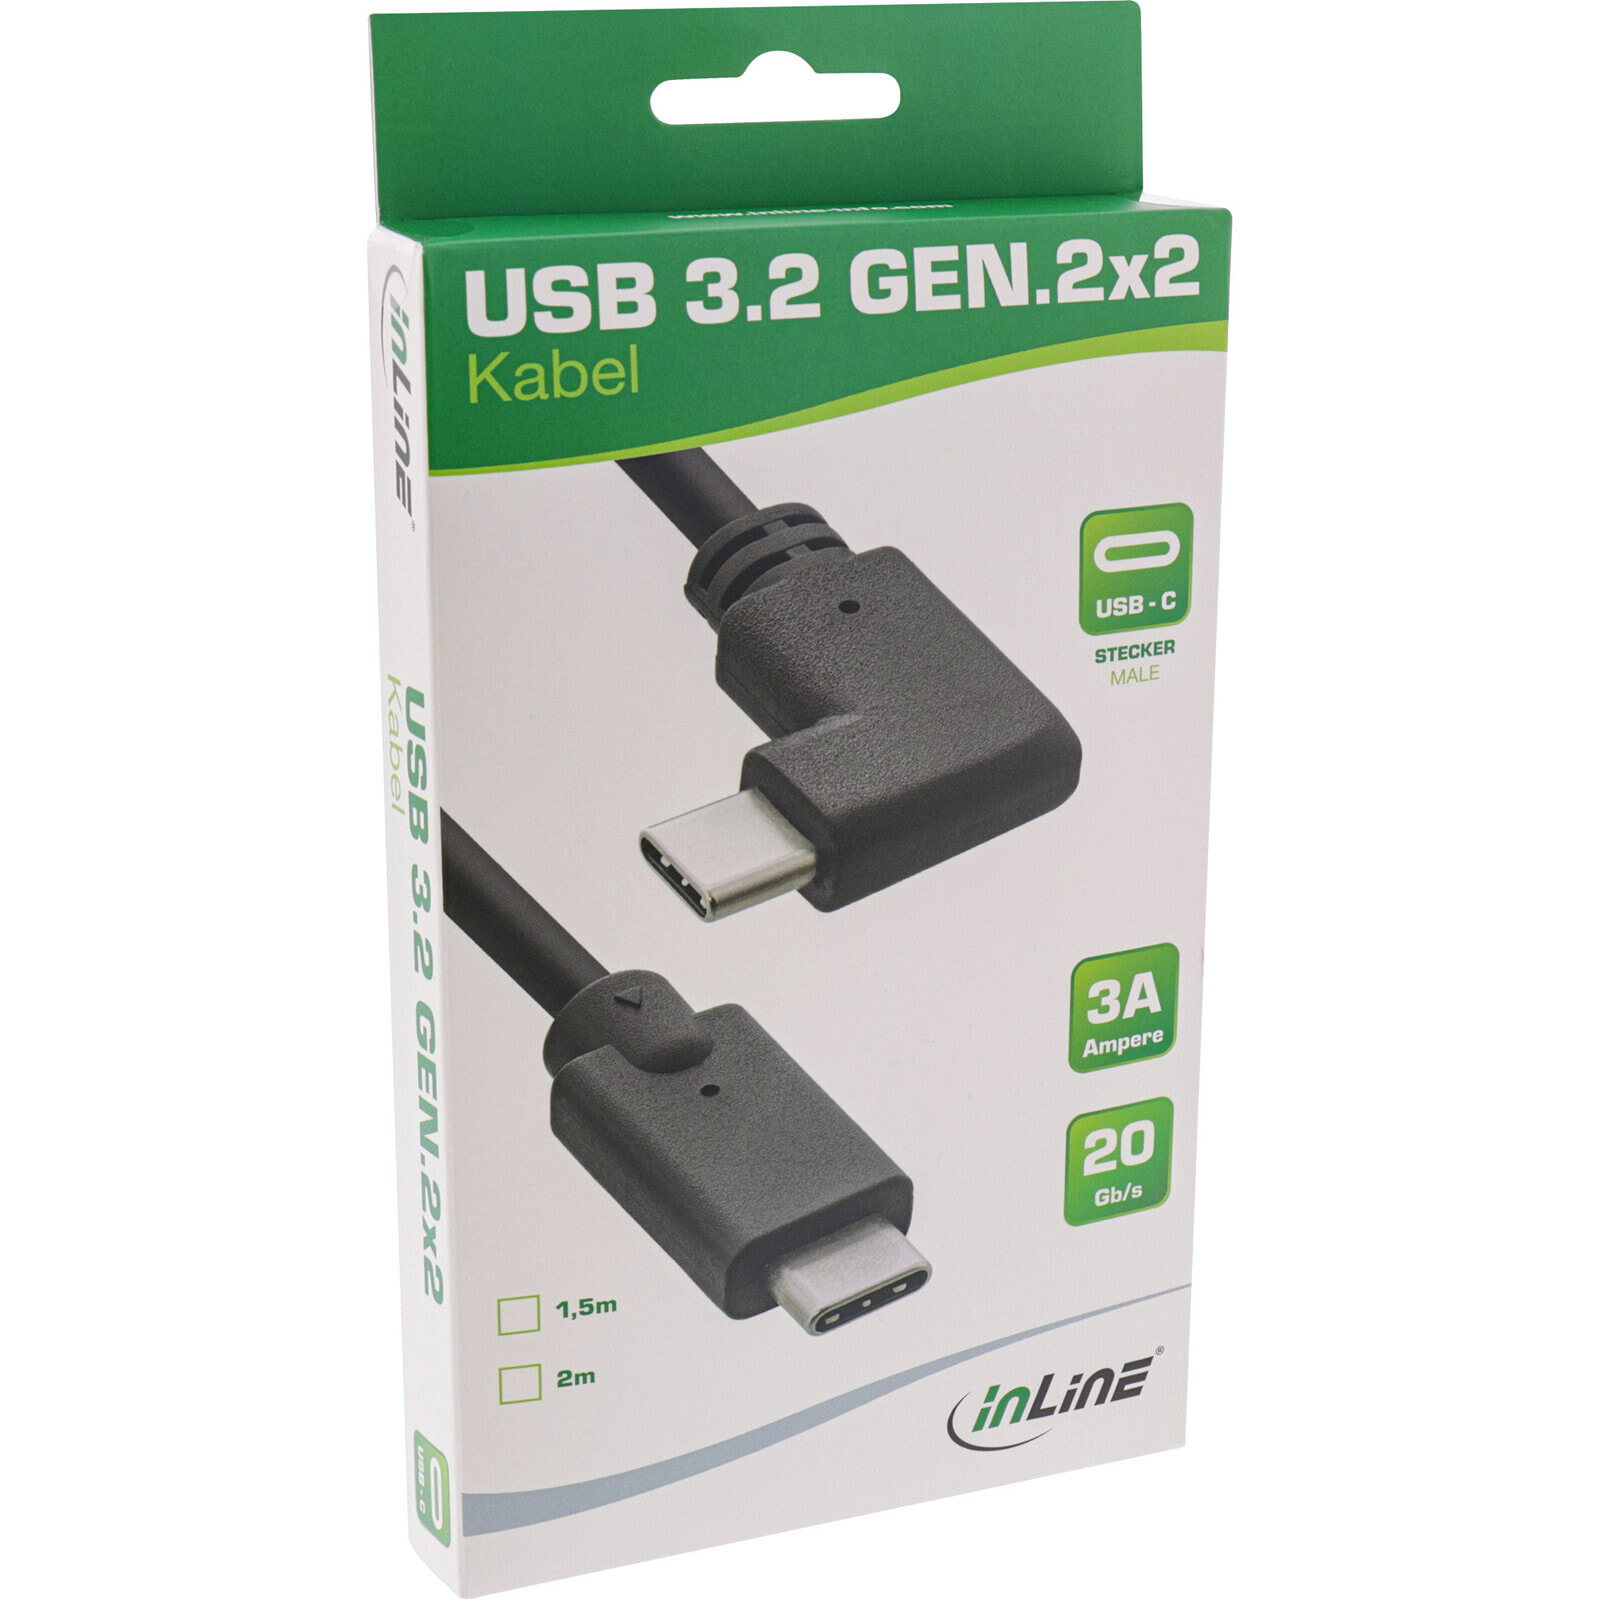 InLine USB 3.2 Gen.2 cable - USB Type-C male/male angled - black - 1.5m - 1.5 m - USB C - USB C - USB 3.2 Gen 2 (3.1 Gen 2) - Black